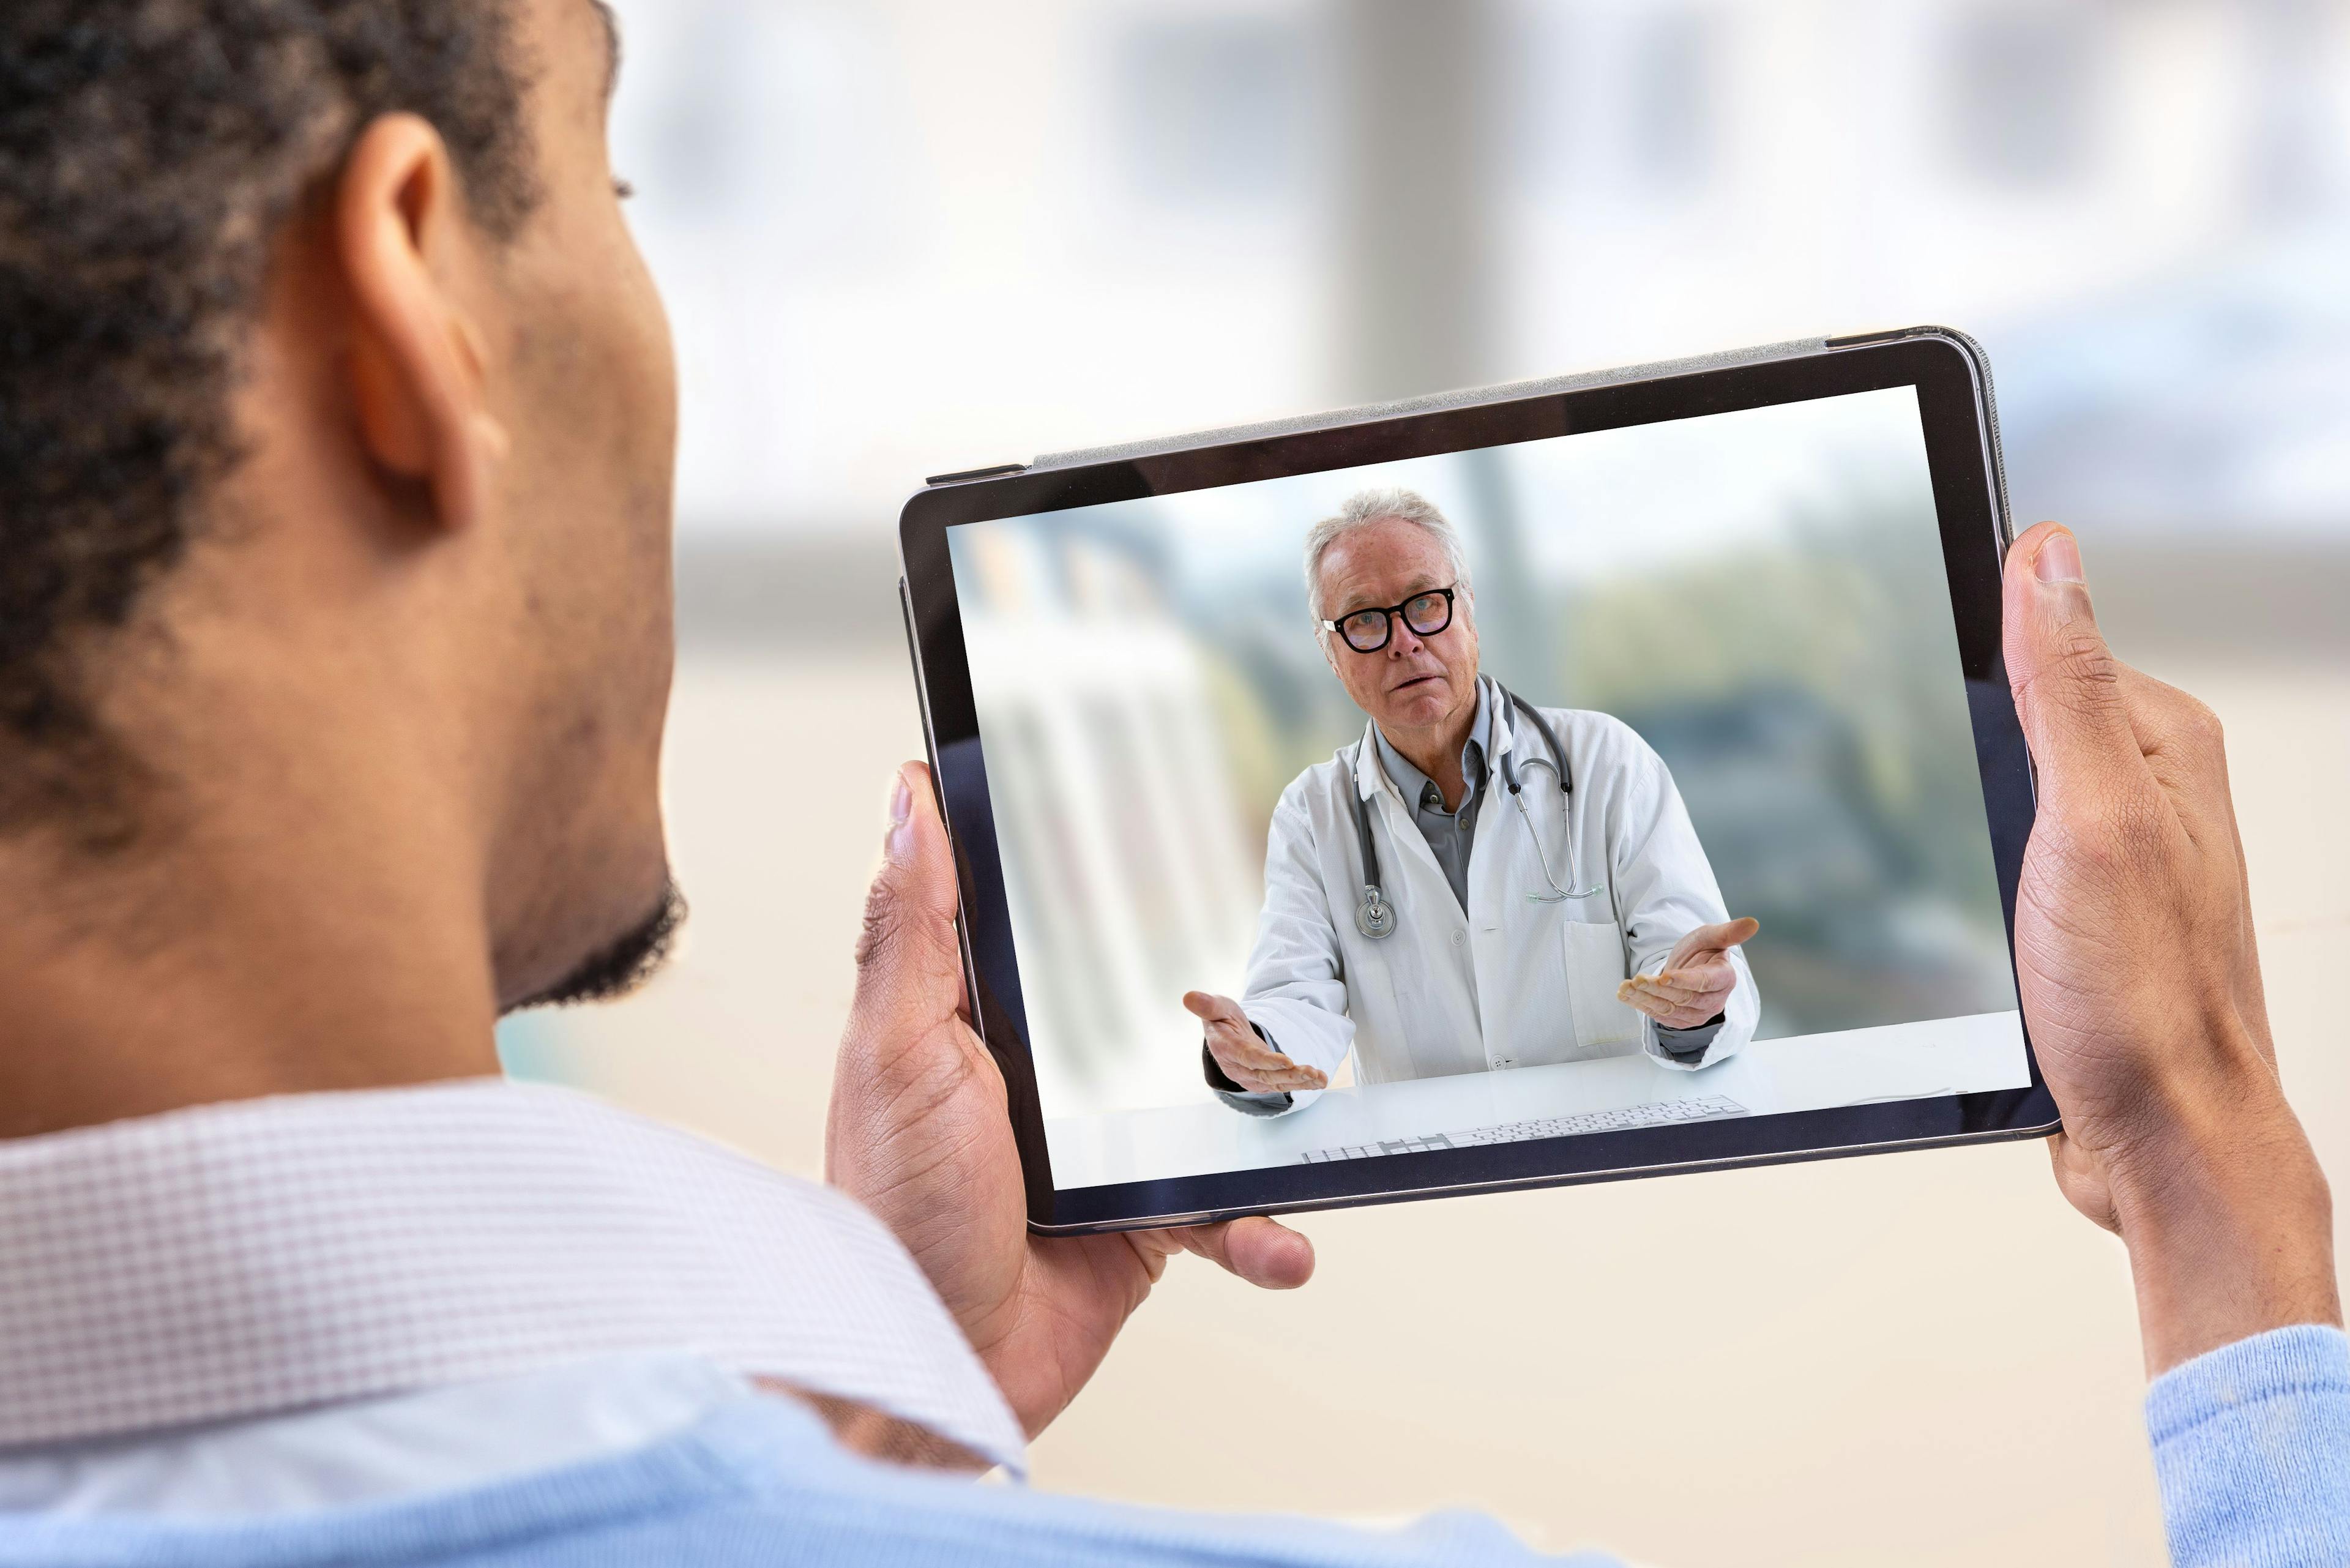 POLL: Do You Still Use Telehealth With Your Patients?